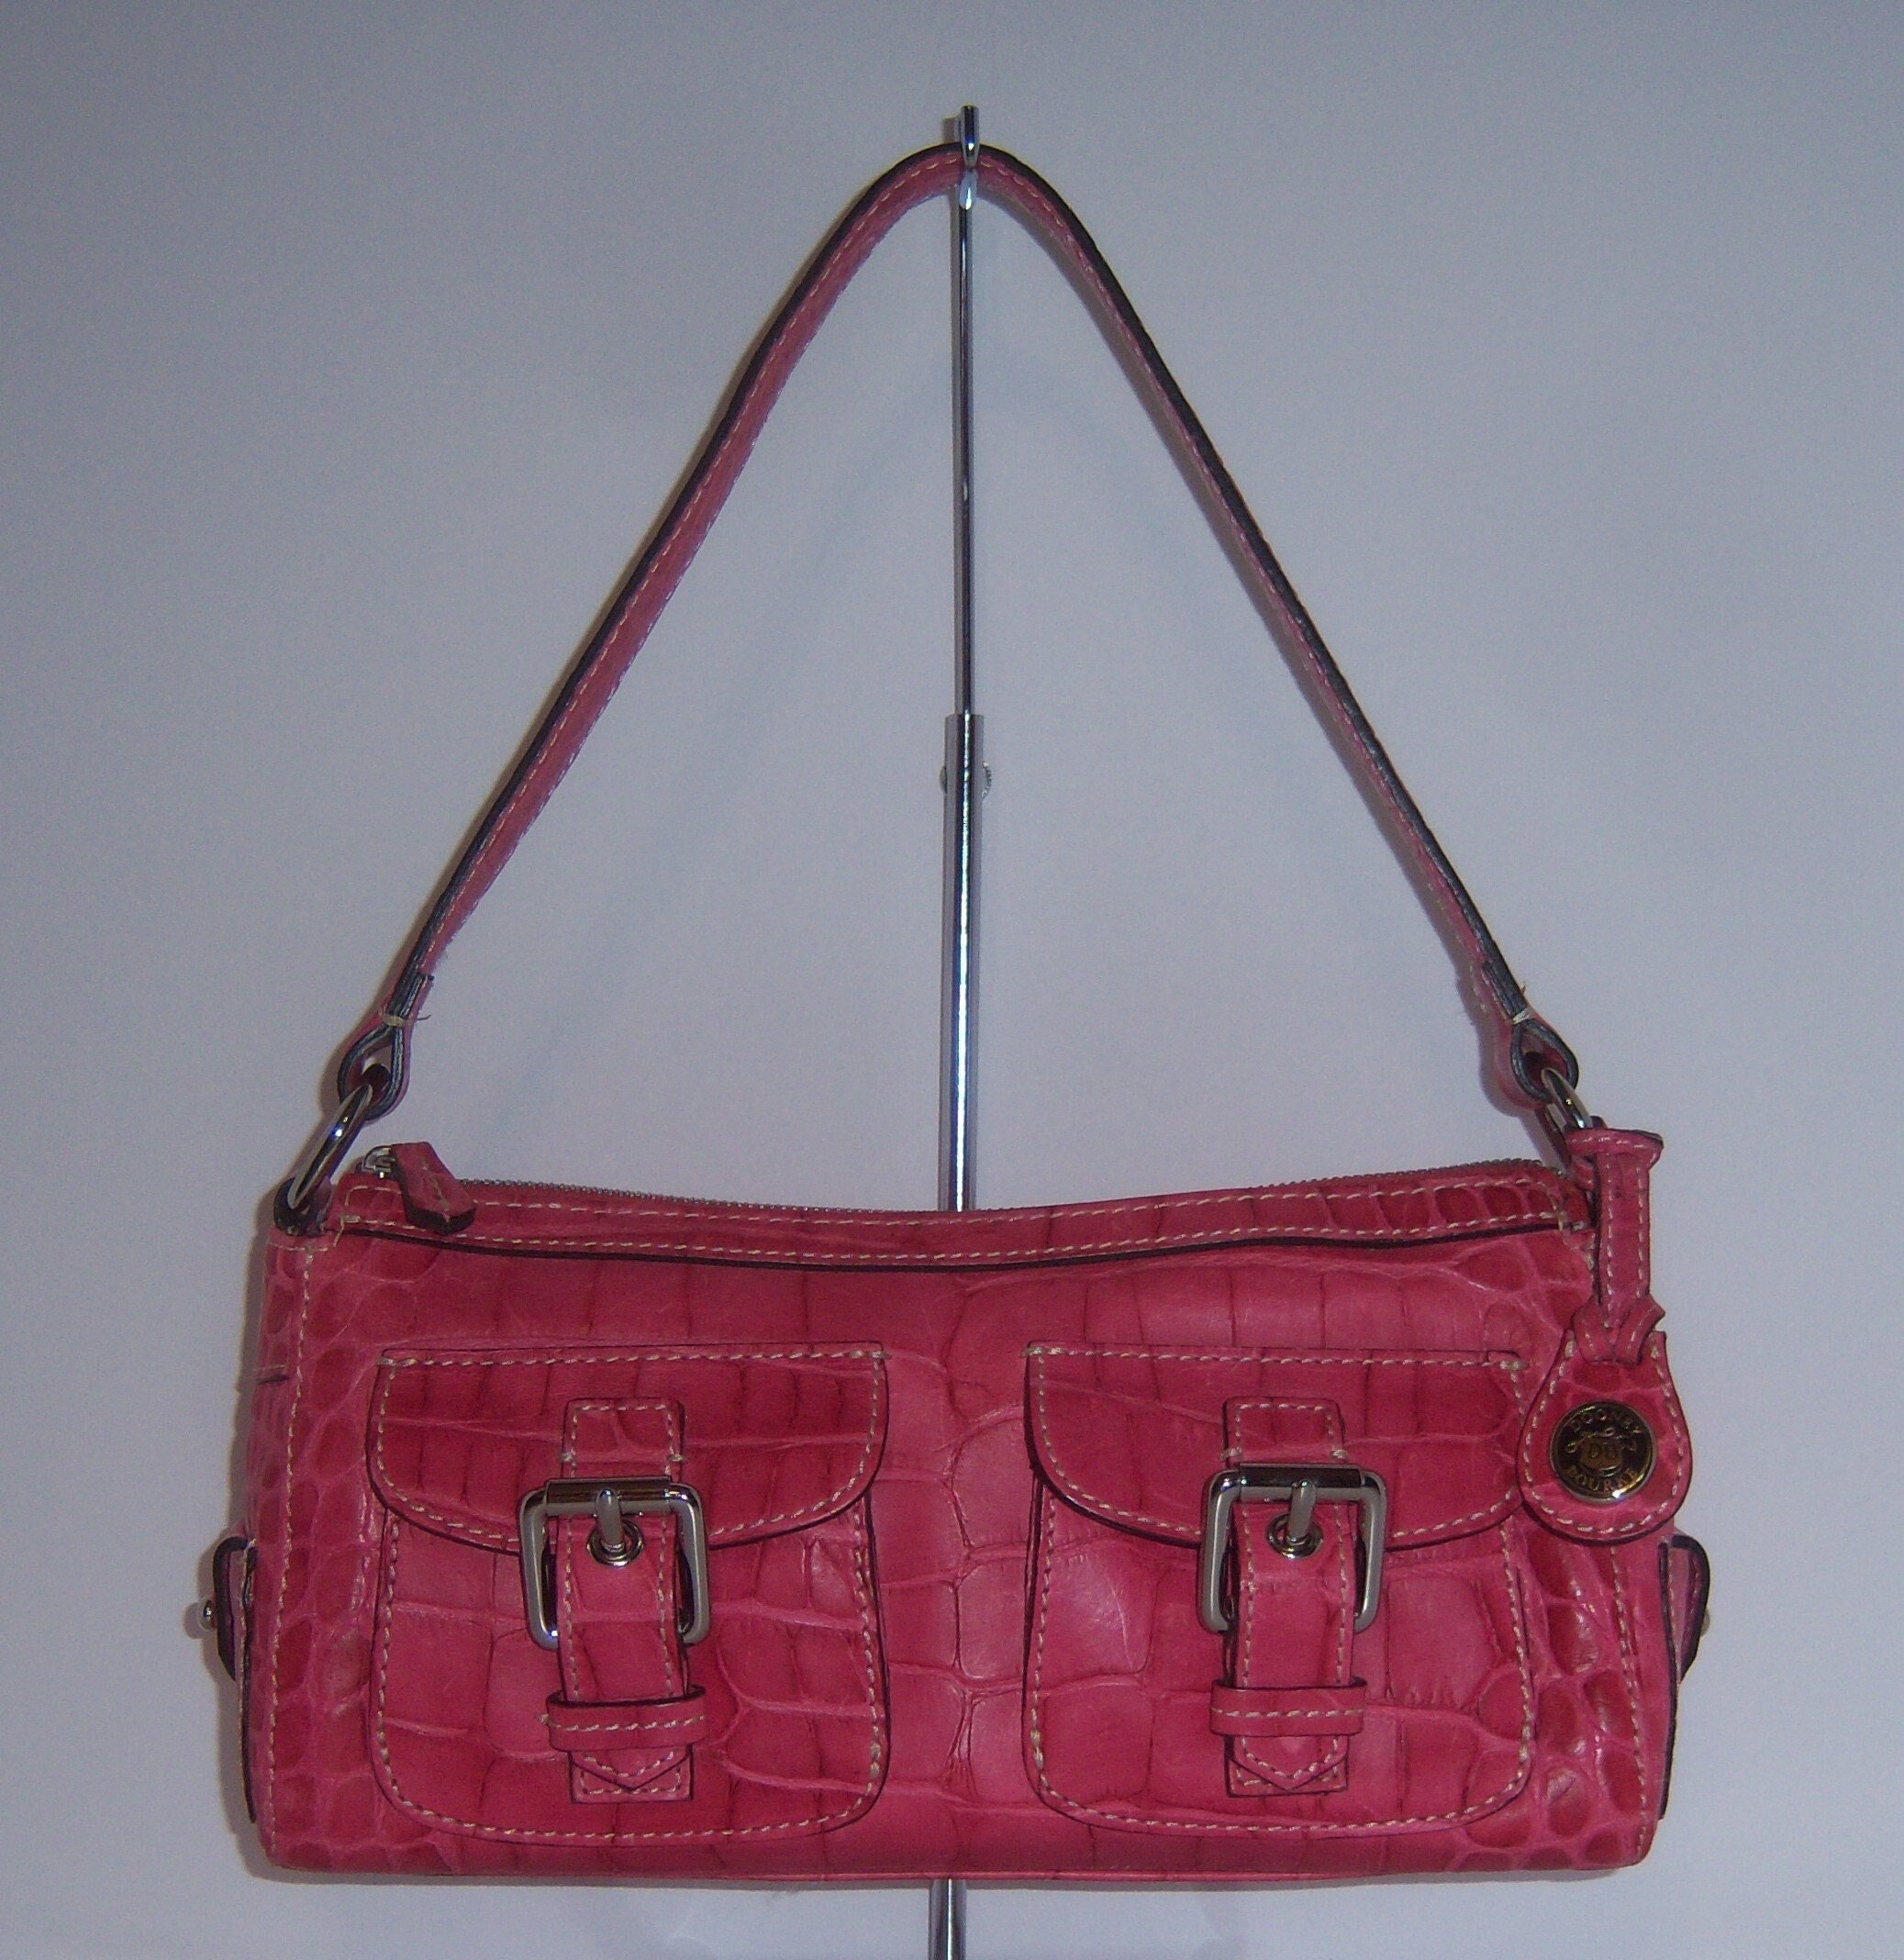 Red Patent Leather Dooney Bourke Purse Outlet - www.edoc.com.vn 1694894221